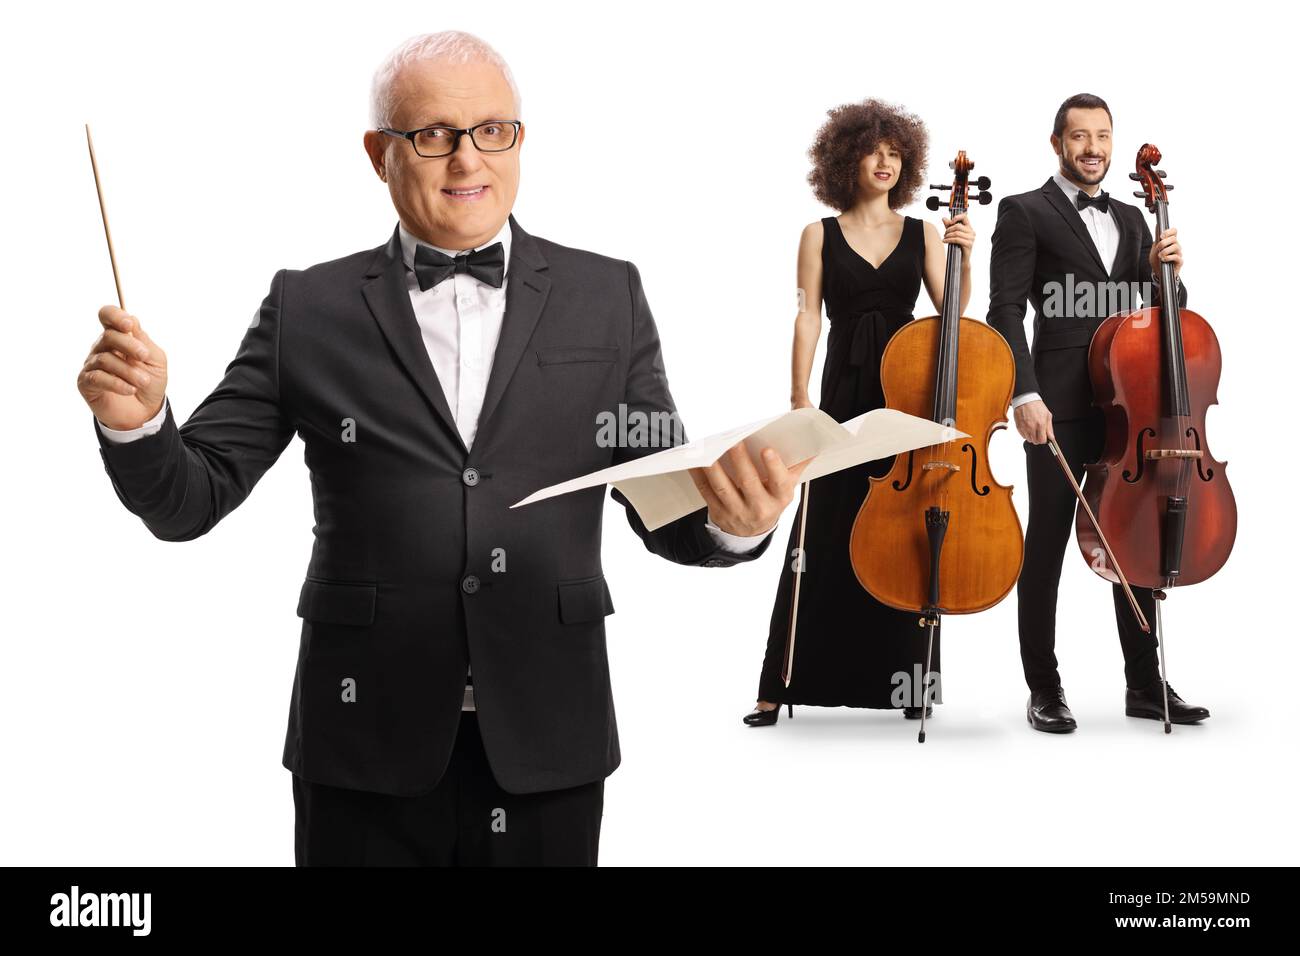 Male conductor and artists posing with cellos isolated on white background Stock Photo